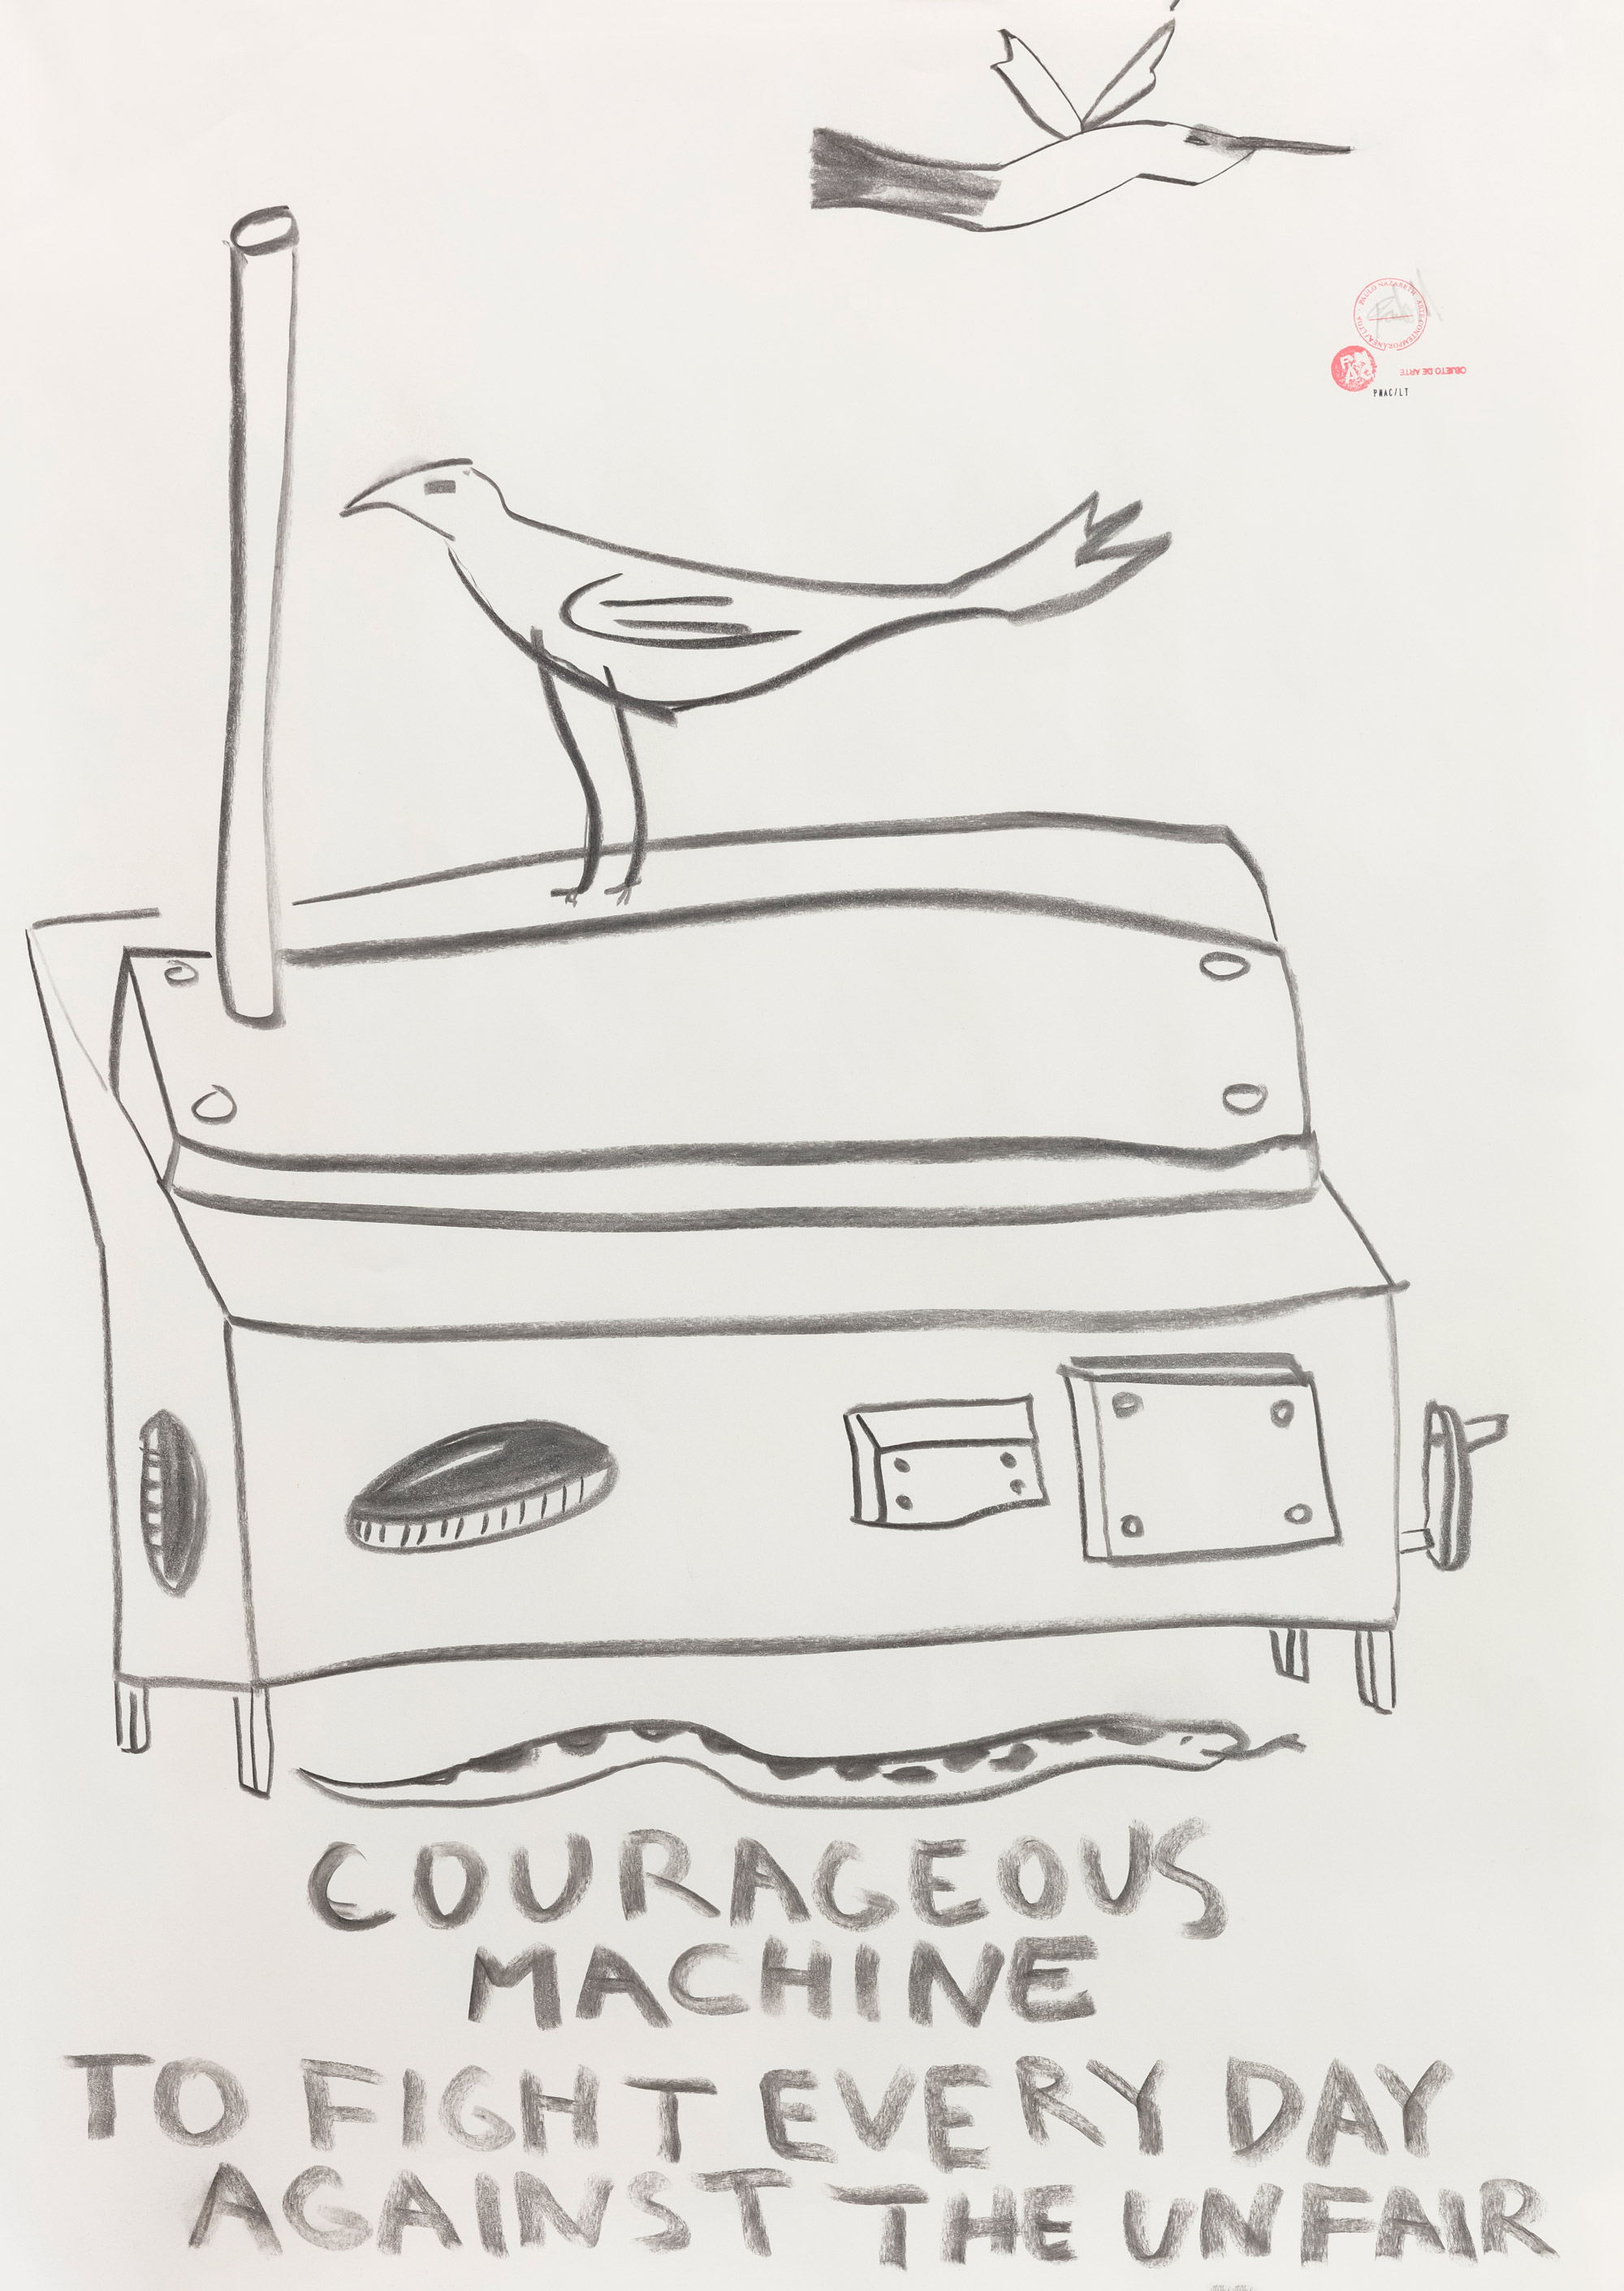  - COURAGEOUS MACHINE TO FIGHT EVERYDAY AGAINST THE UNFAIR, 2019